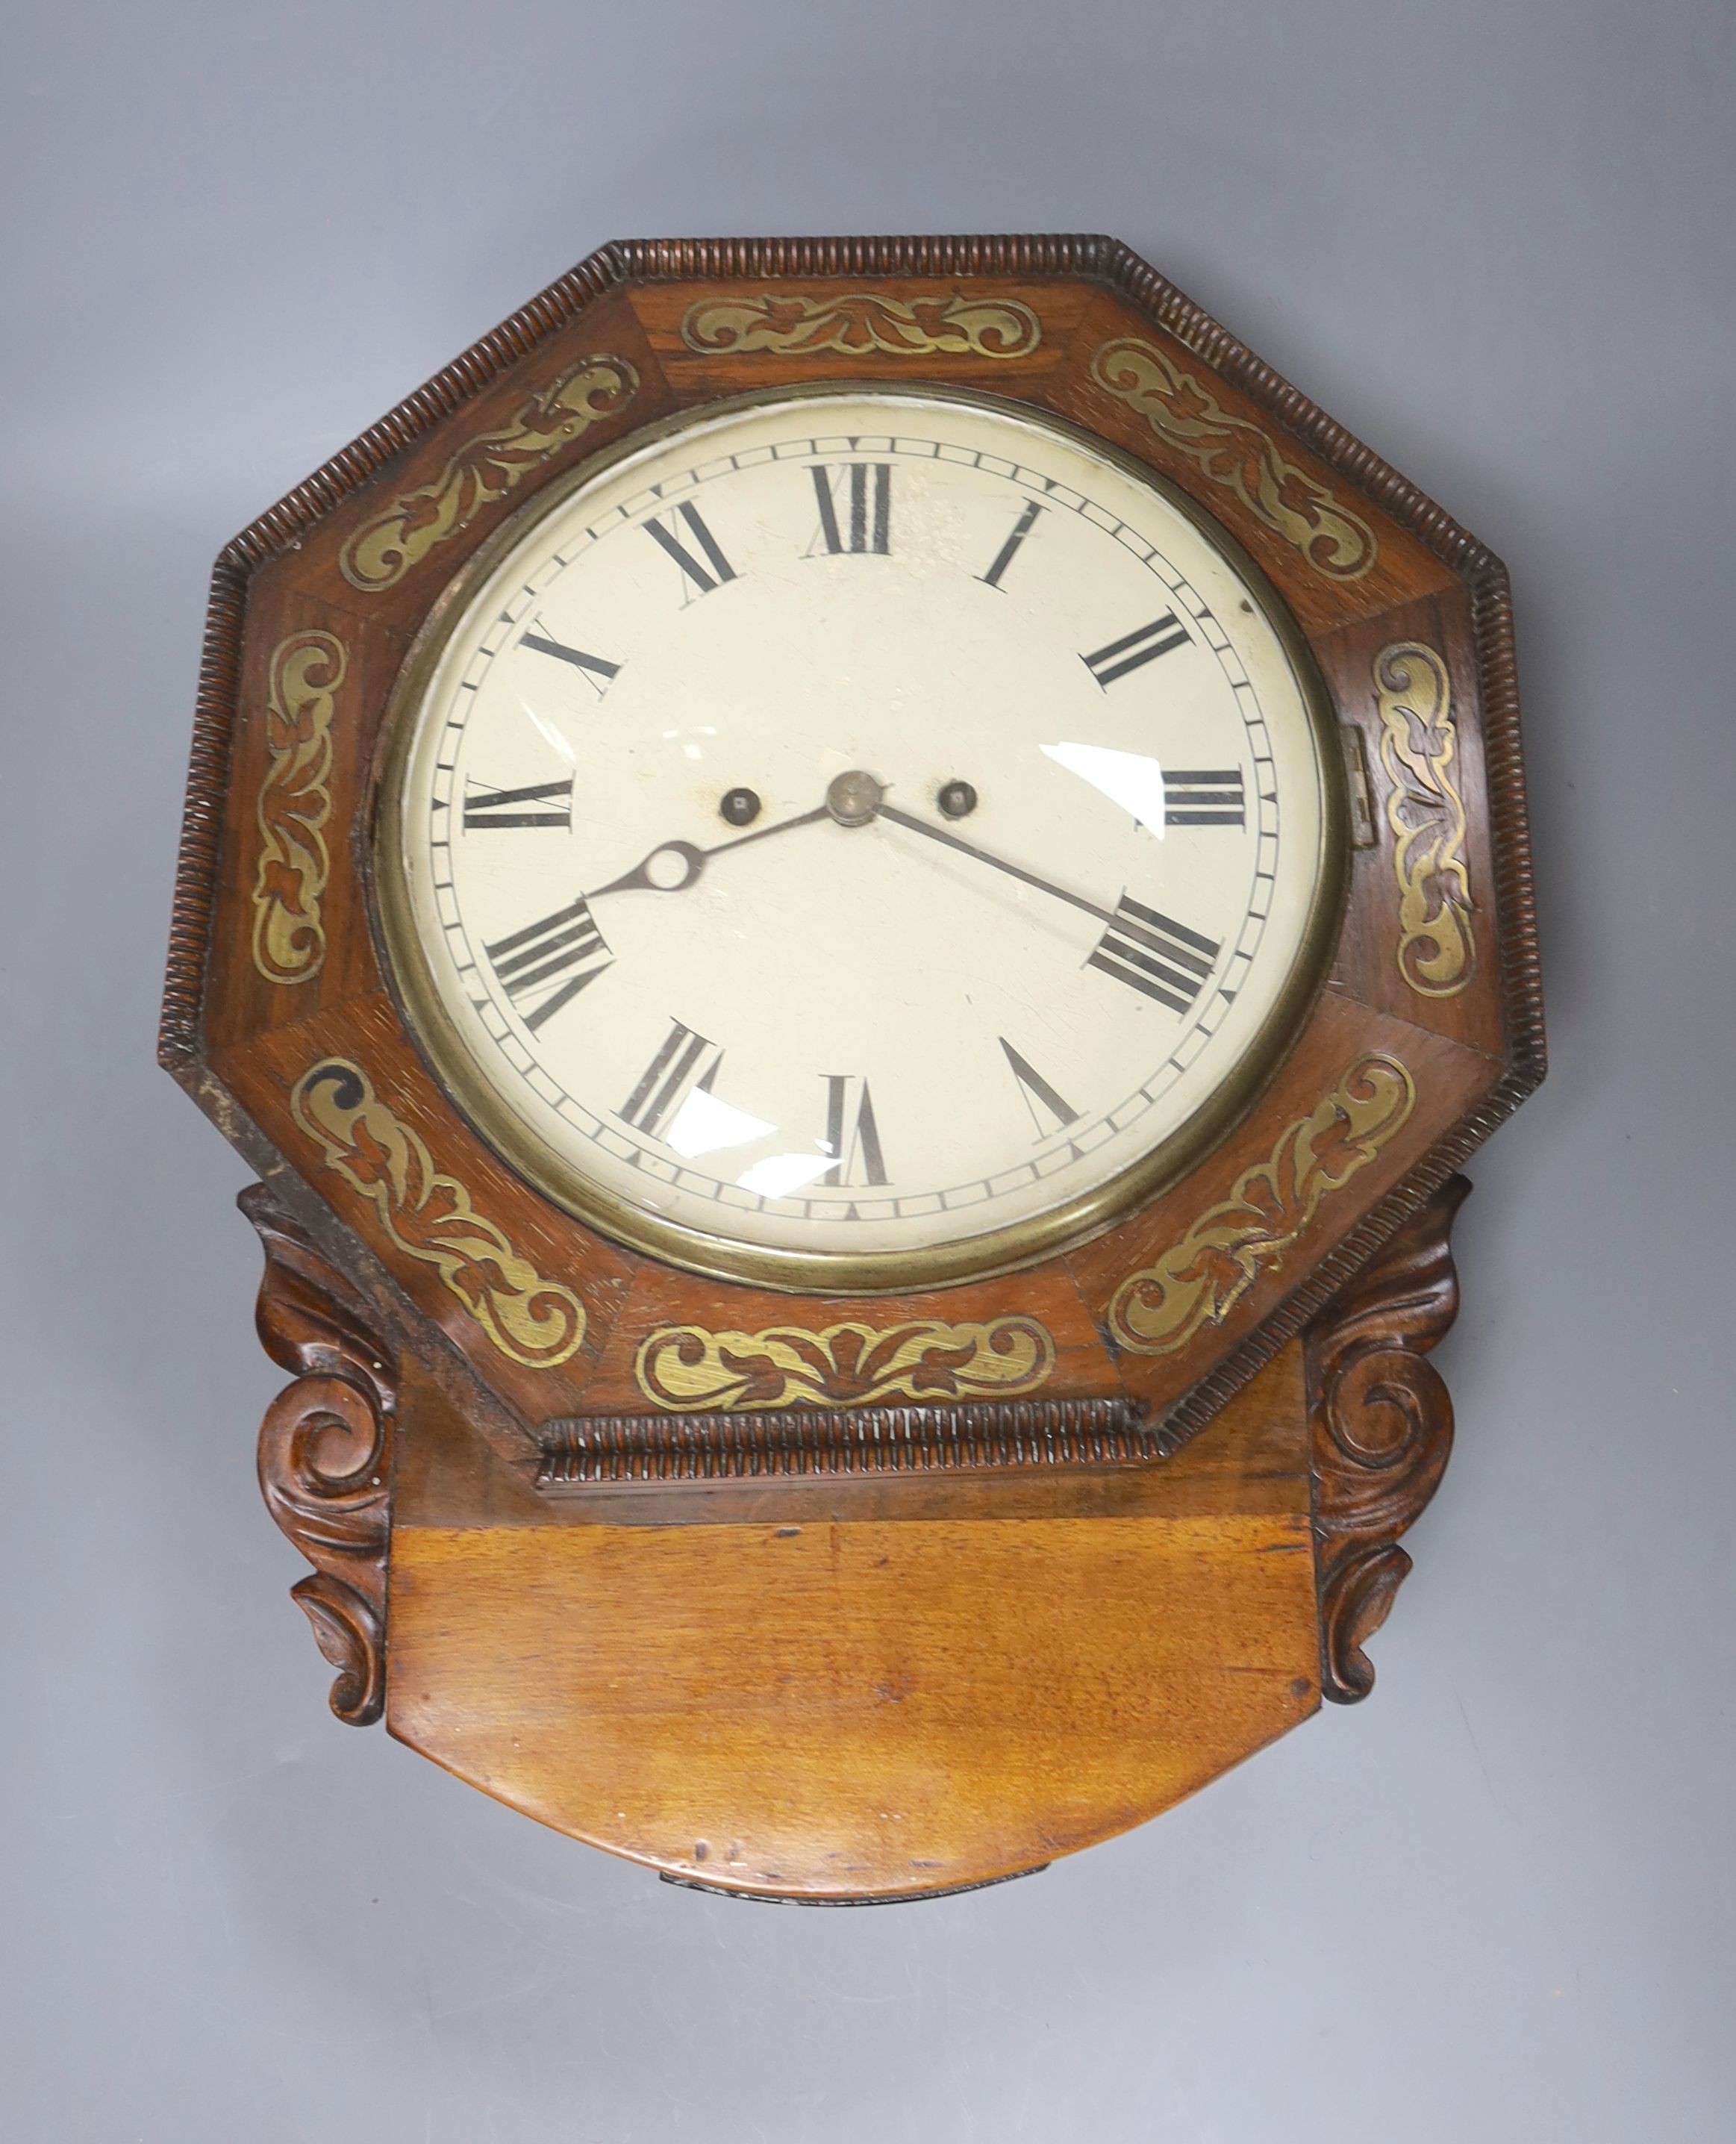 A 19th century rosewood and cut brass cased wall clock, with a 9